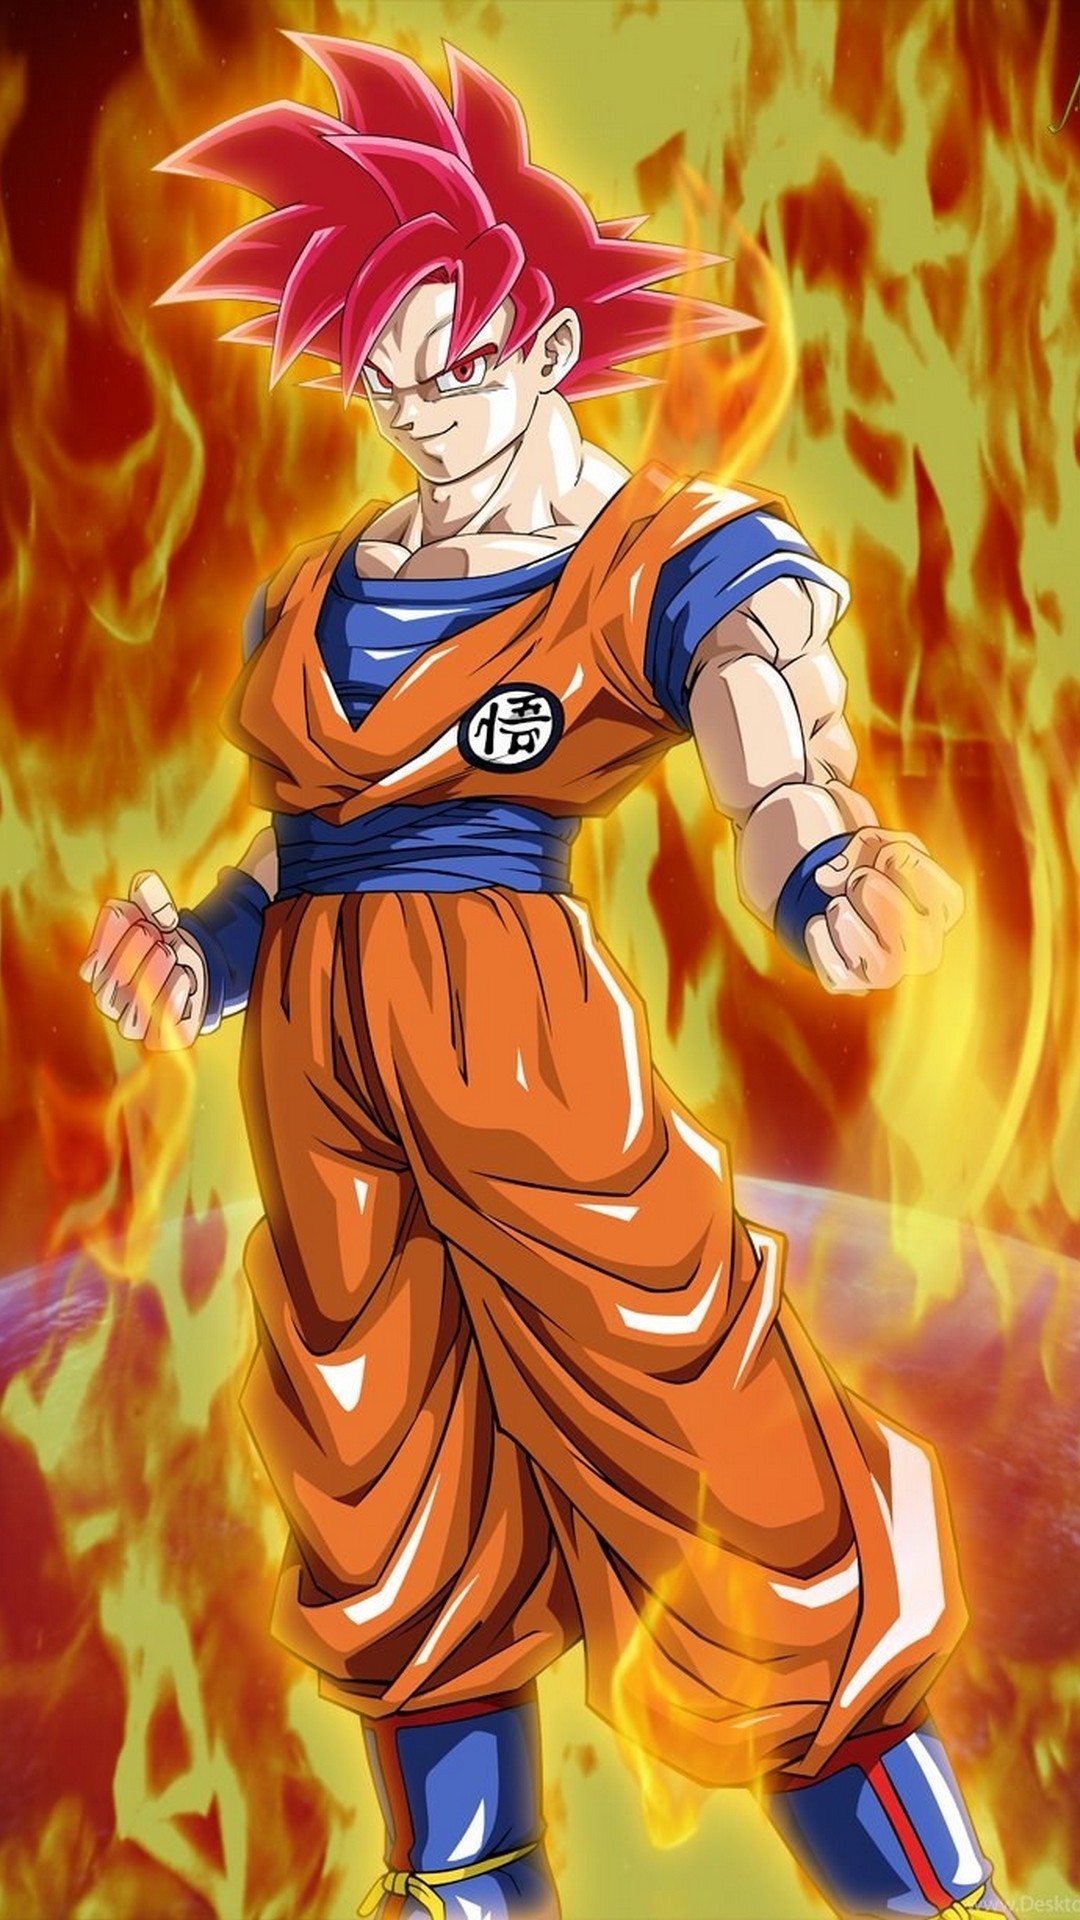 Goku Super Saiyan God Wallpaper For iPhone with image resolution 1080x1920 pixel. You can make this wallpaper for your iPhone 5, 6, 7, 8, X backgrounds, Mobile Screensaver, or iPad Lock Screen